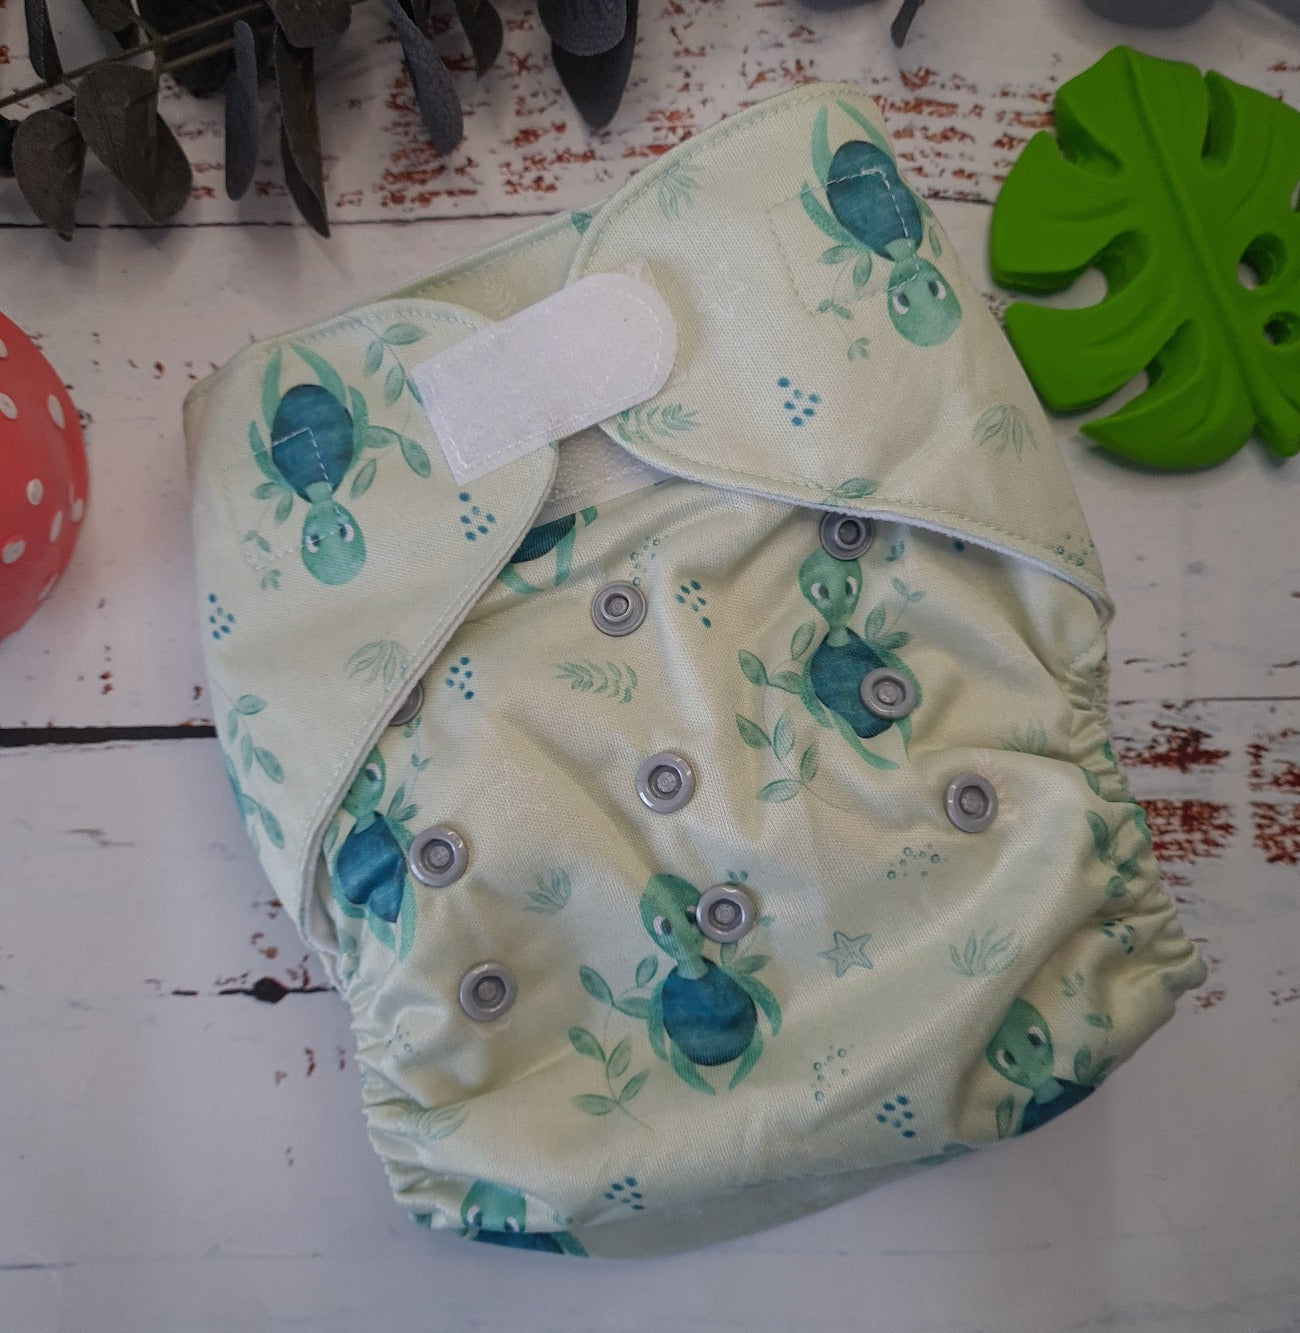 An image of cloth pocket nappies with hemp boosters neatly arranged on a flat surface. The nappies are made of soft, colorful fabric with elastic leg cuffs and snaps for adjustable sizing. The hemp boosters are slim inserts made from natural fibers, designed to enhance absorbency. This eco-friendly diapering option provides reusable and sustainable comfort for babies